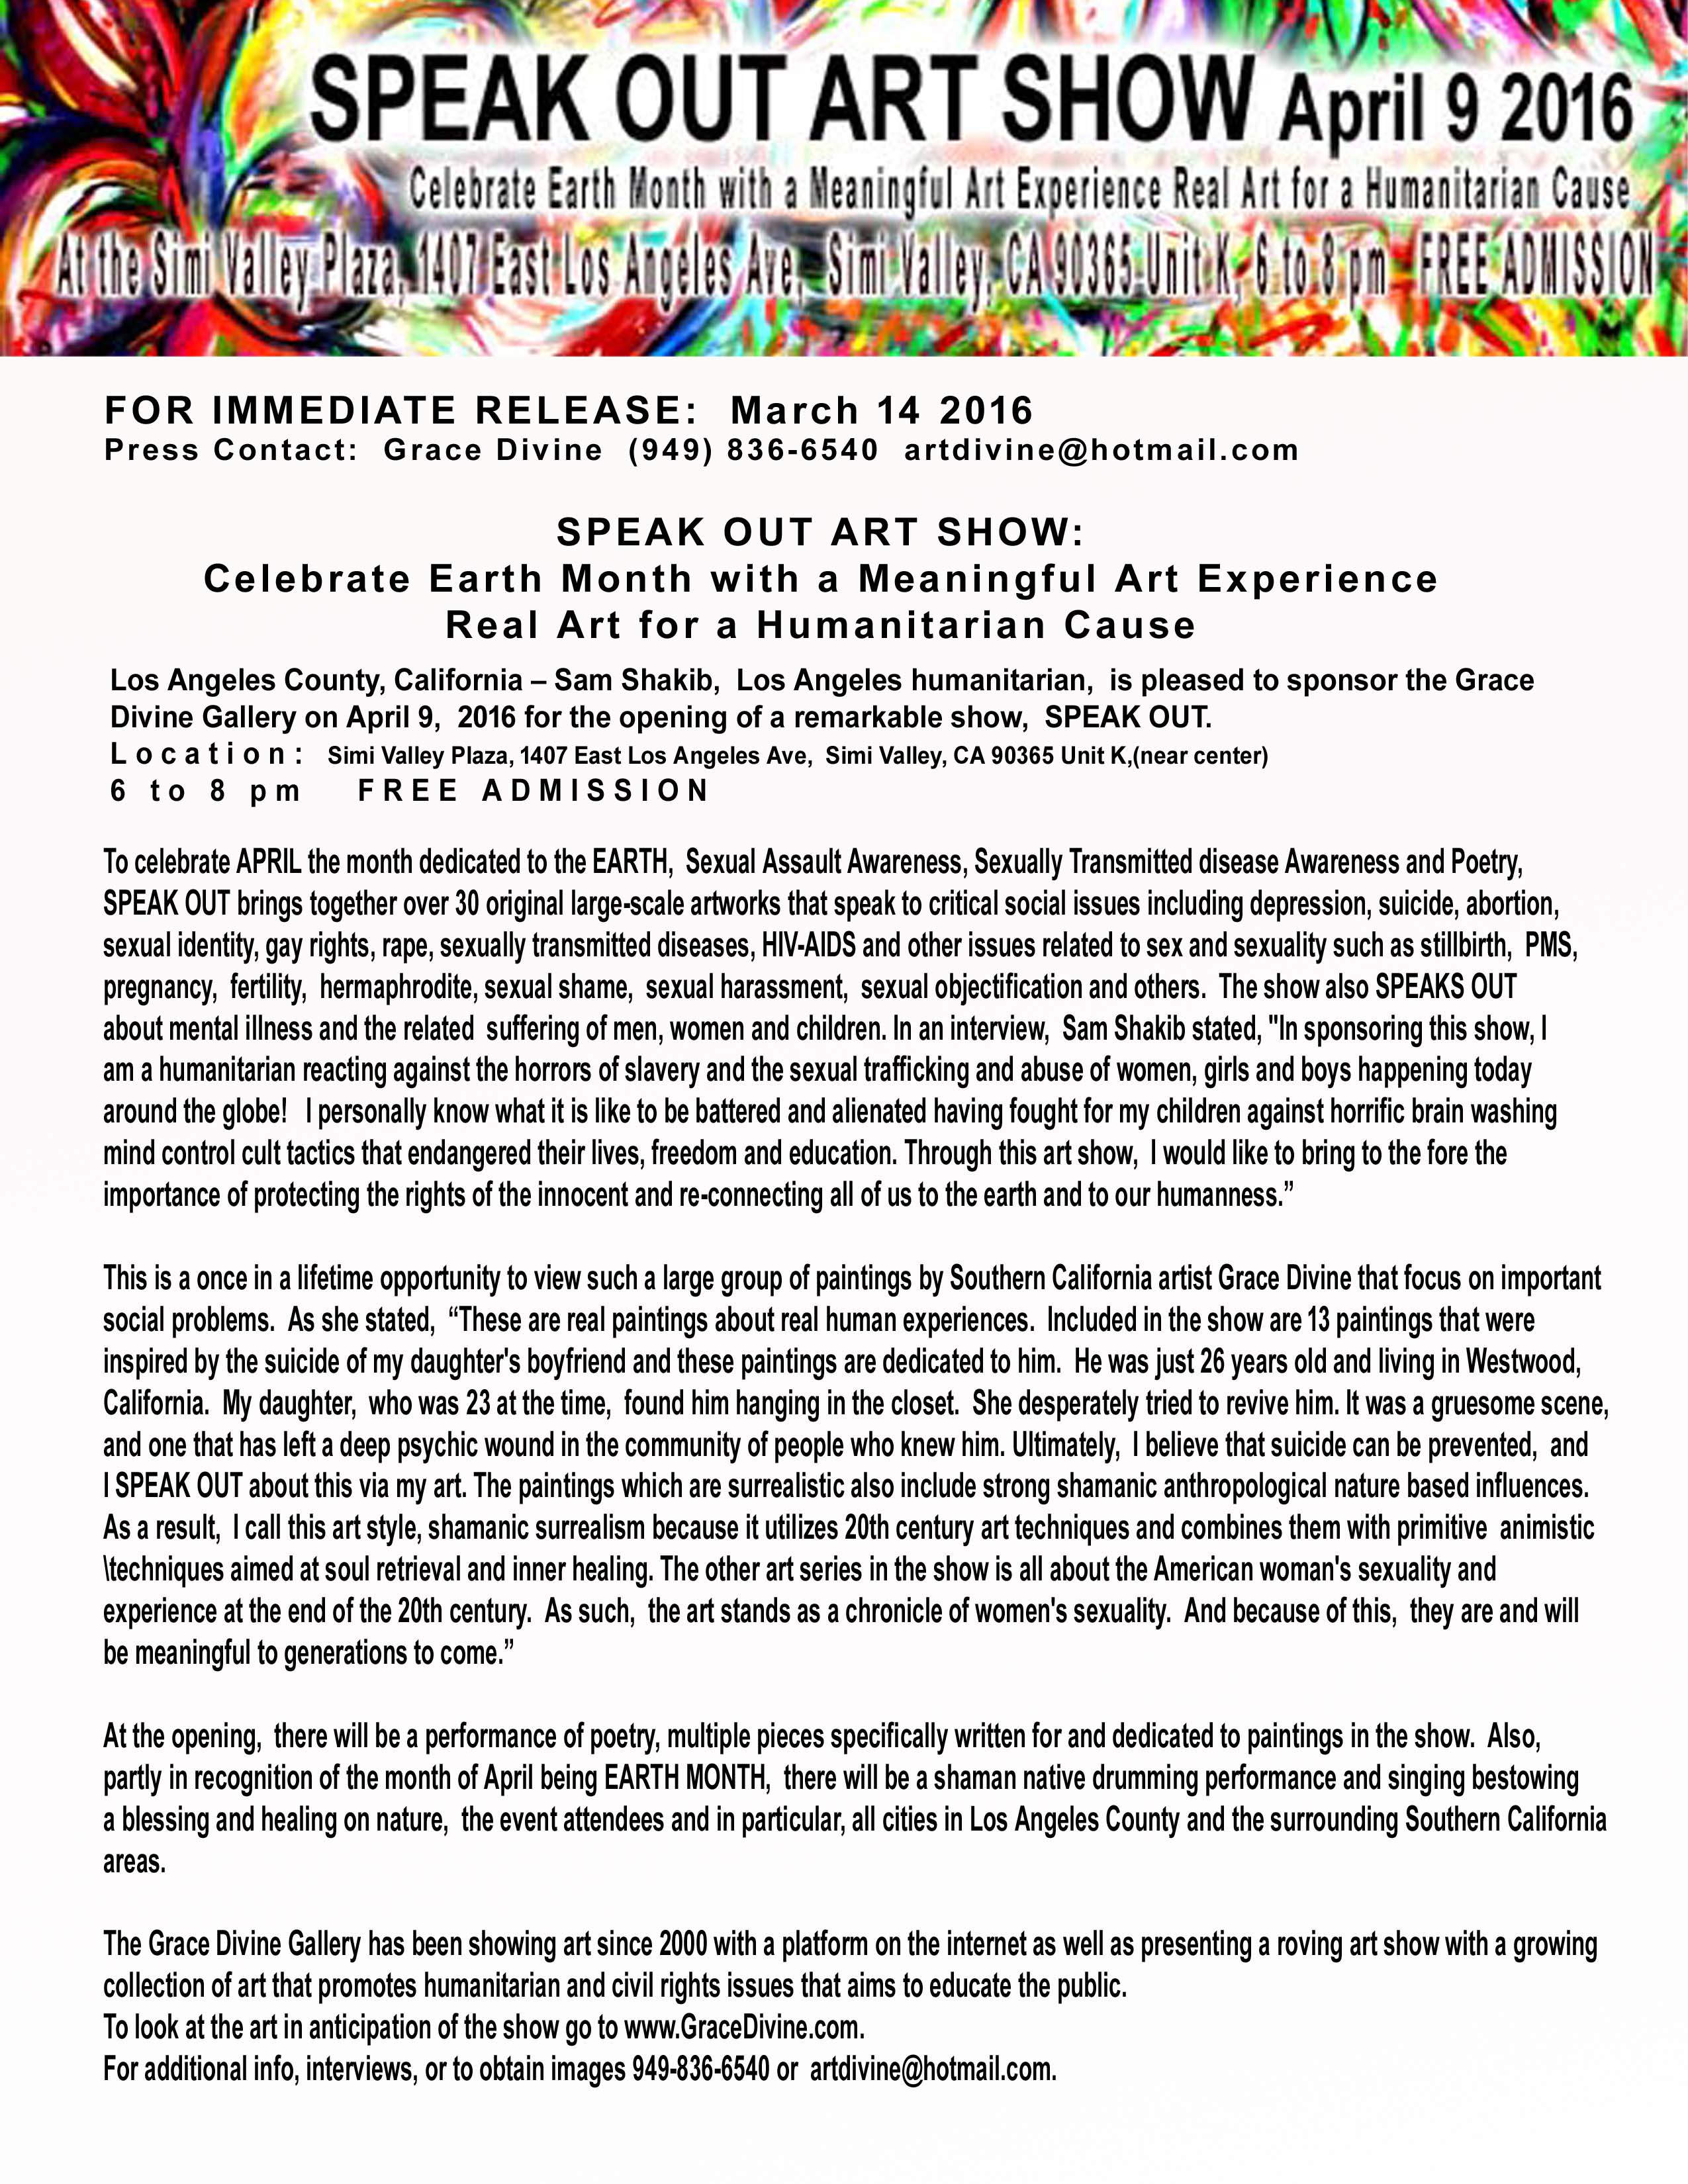 SPEAK OUT ART SHOW: CELEBRATE APRIL 2016 EARTH MONTH WITH A MEANINGFUL ART EXPERIENCE